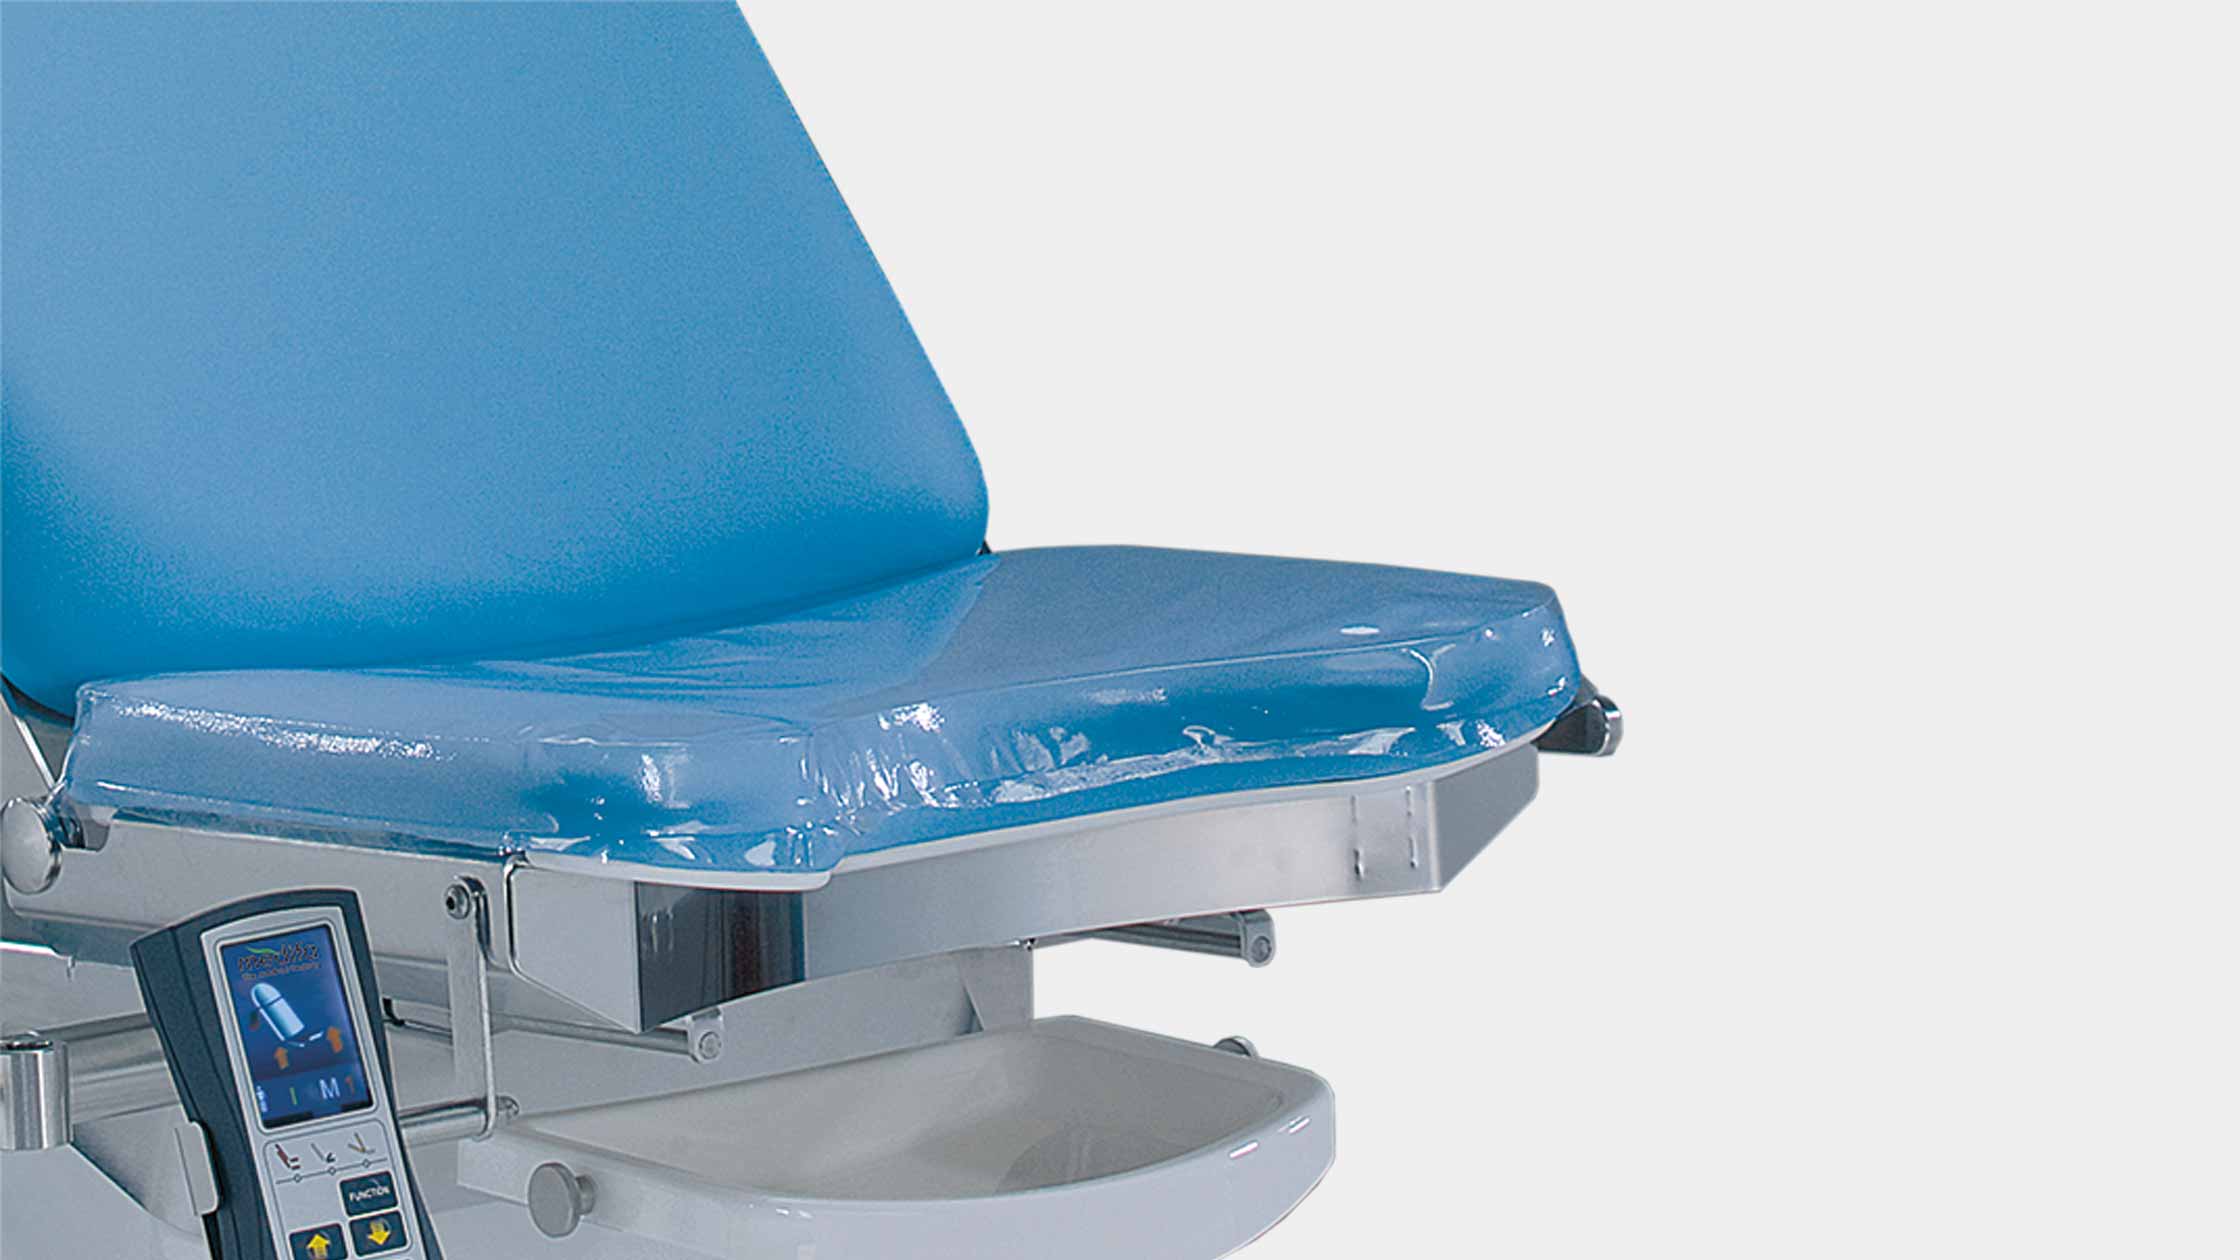 General accessories for examination chairs